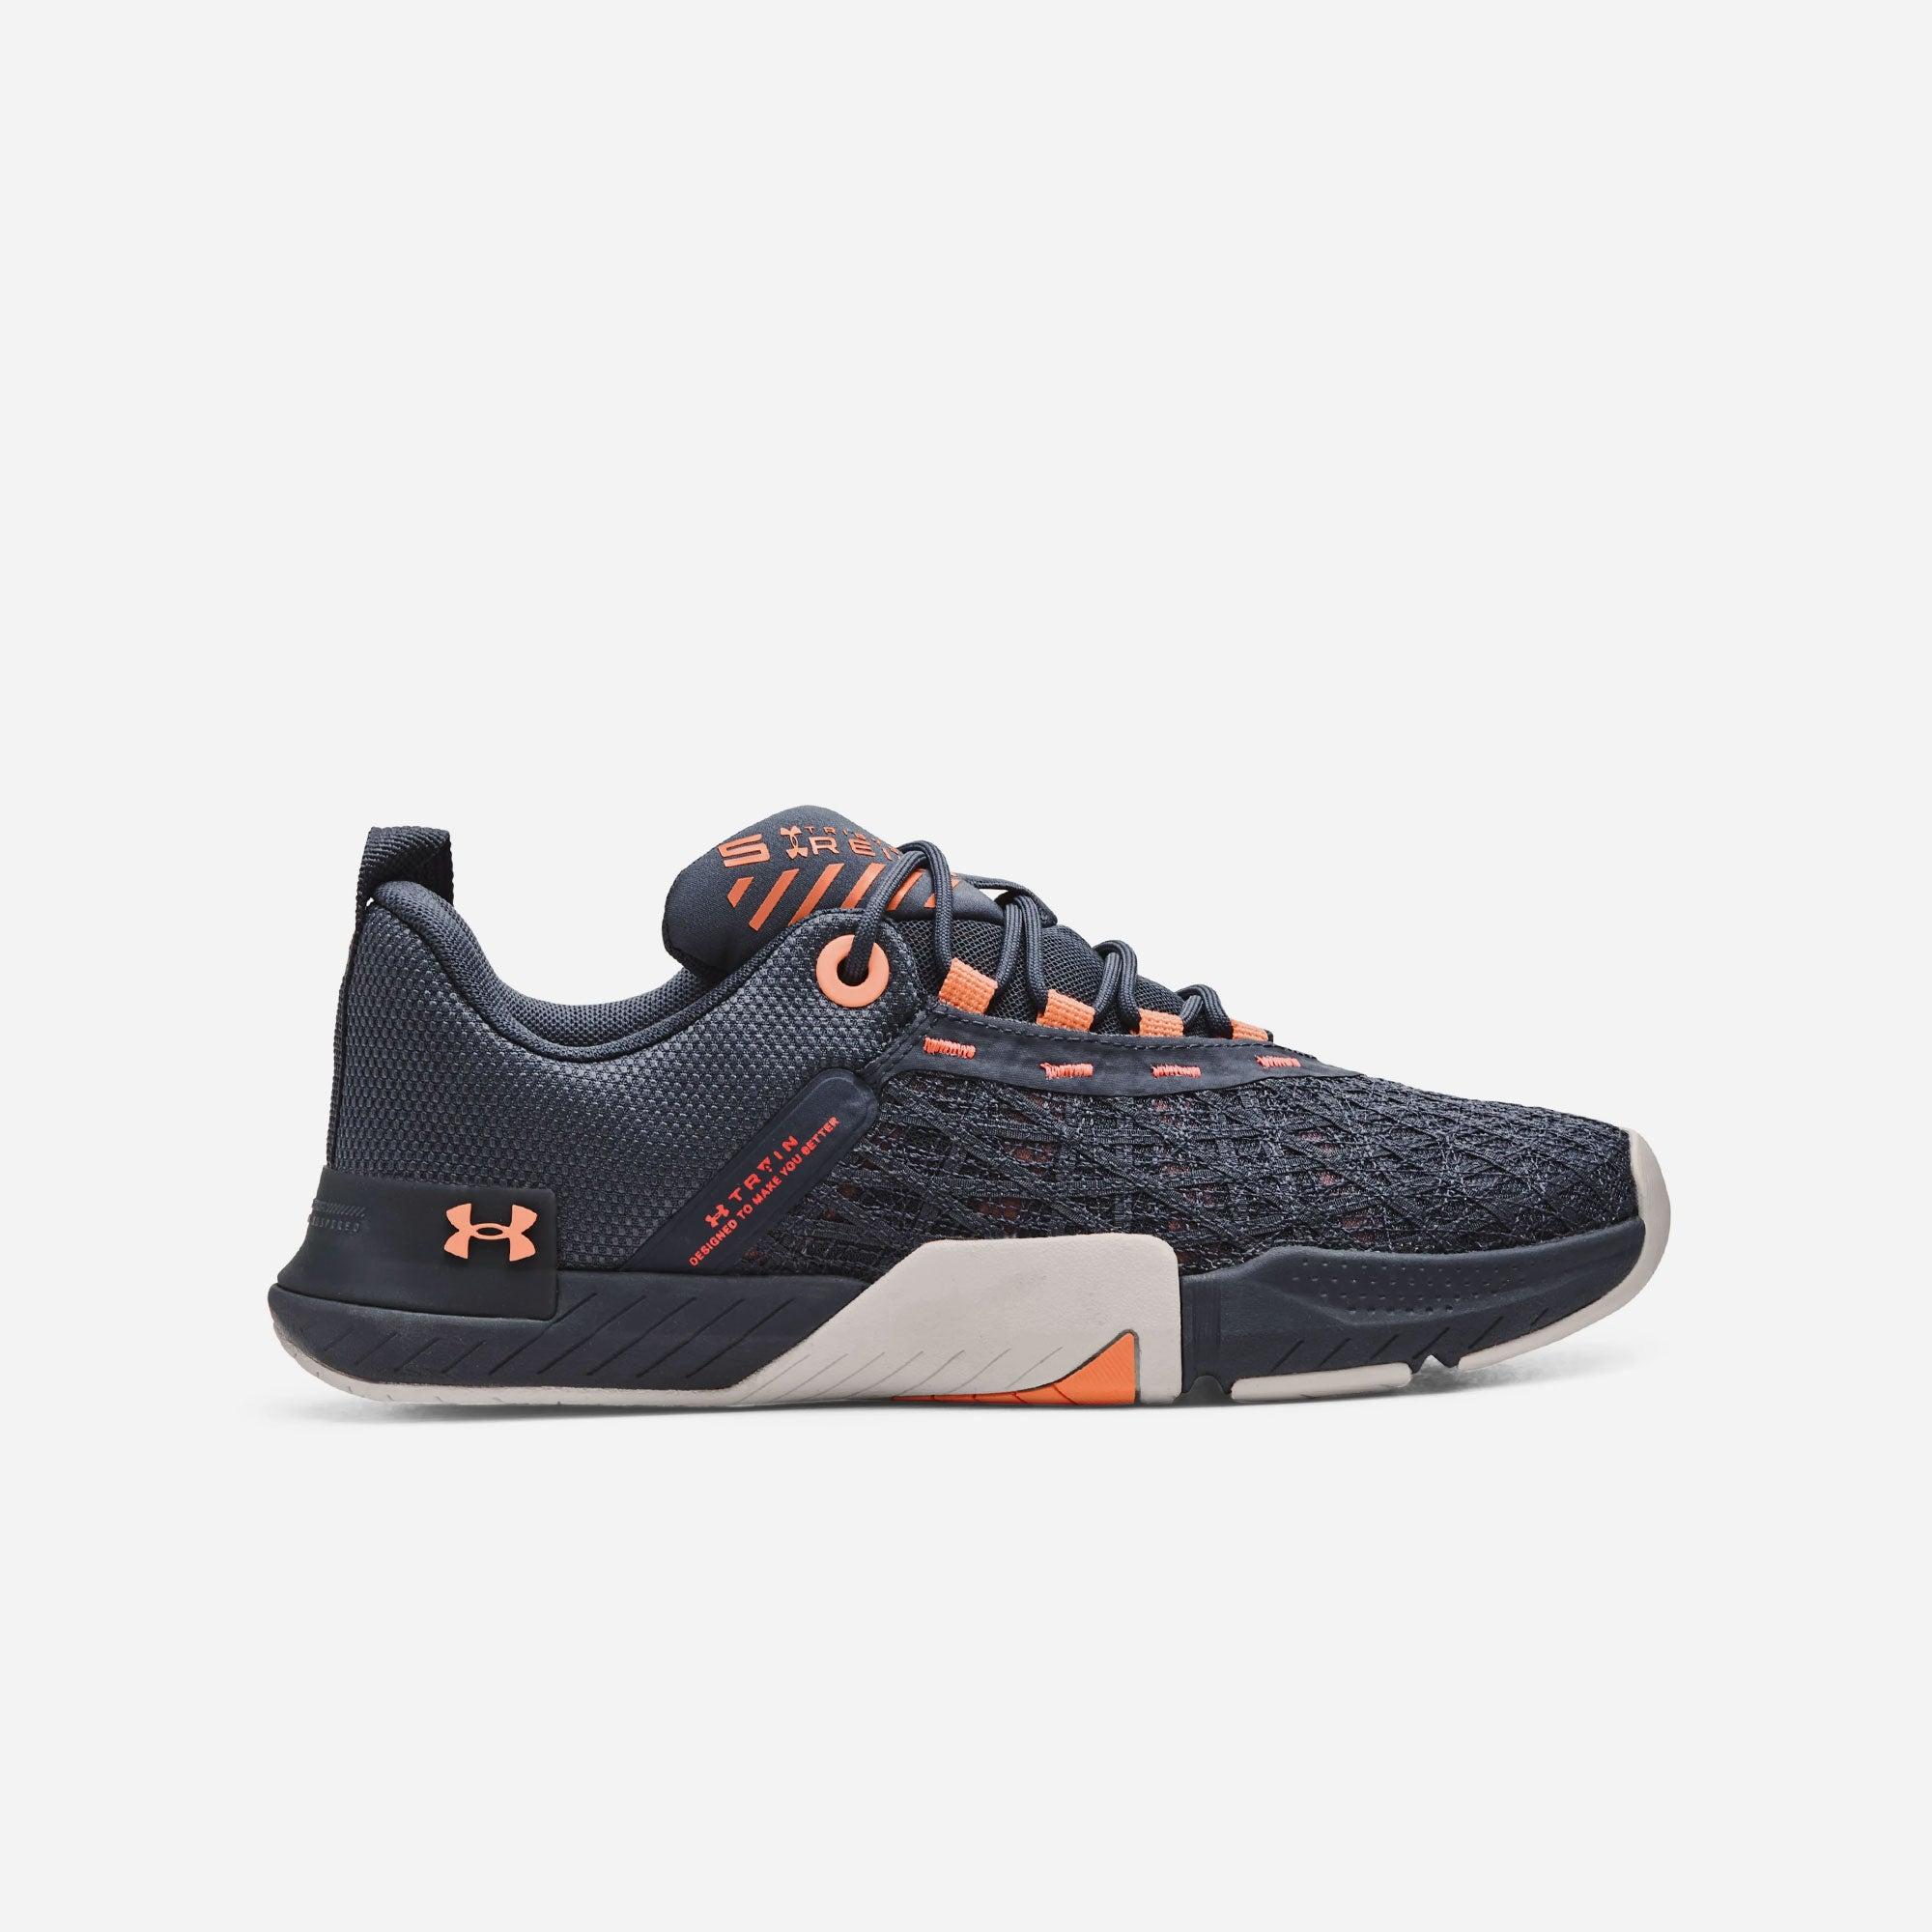 Giày thể thao nam Under Armour Tribase Reign 5 - 3026021-400